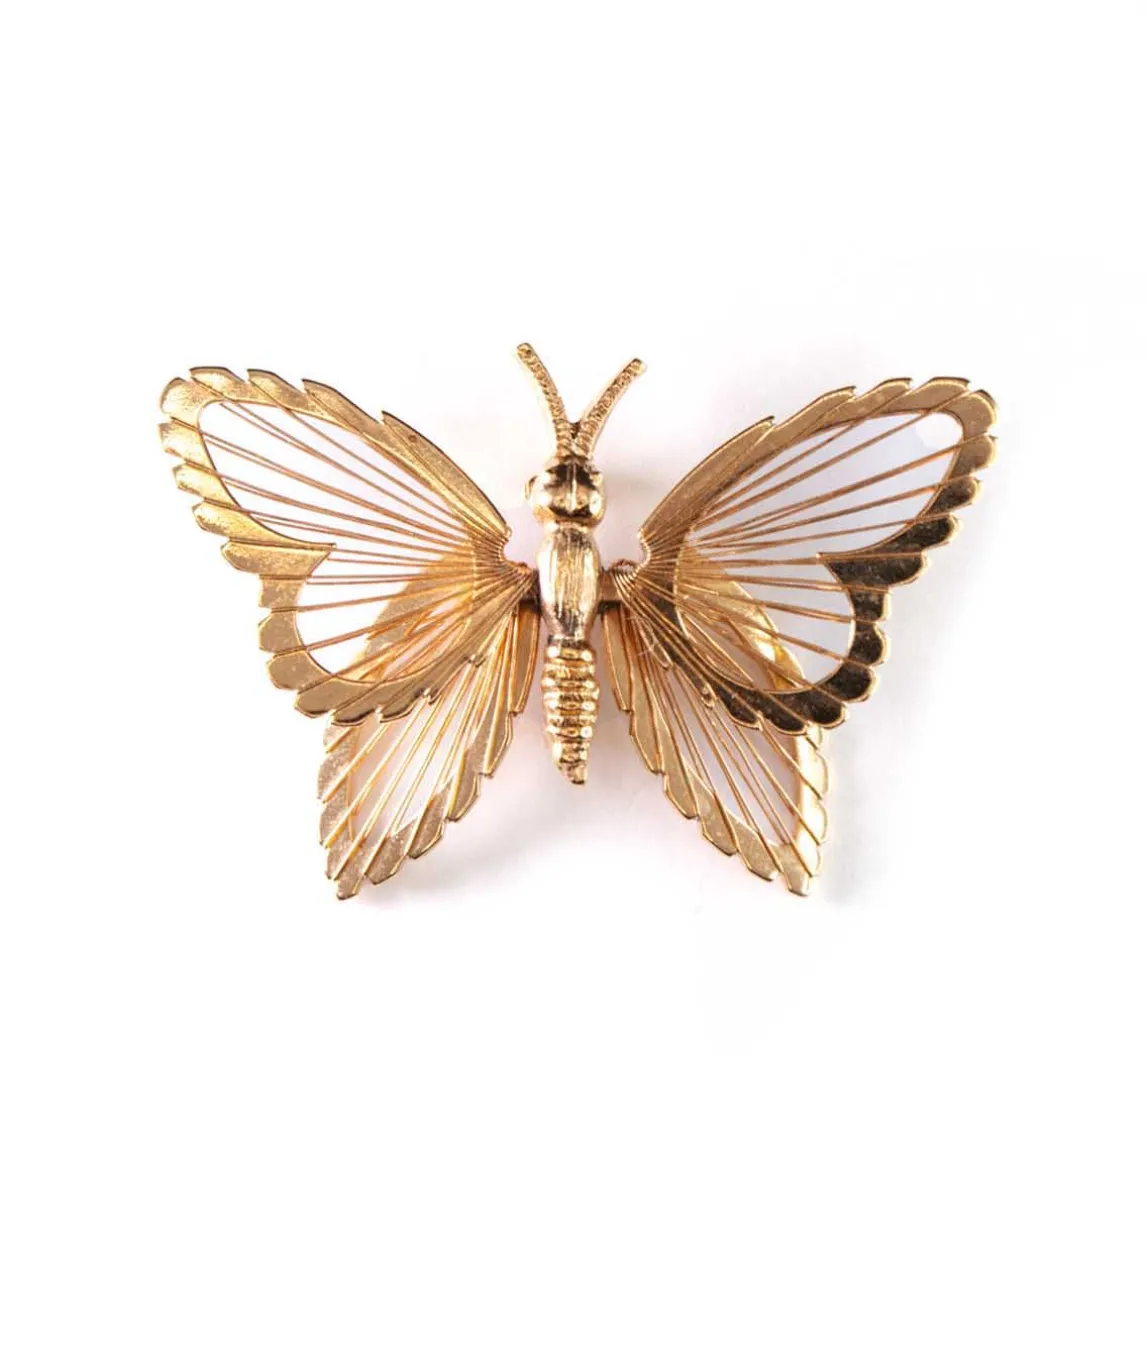 Top view of gold tone wire butterfly brooch by Monet